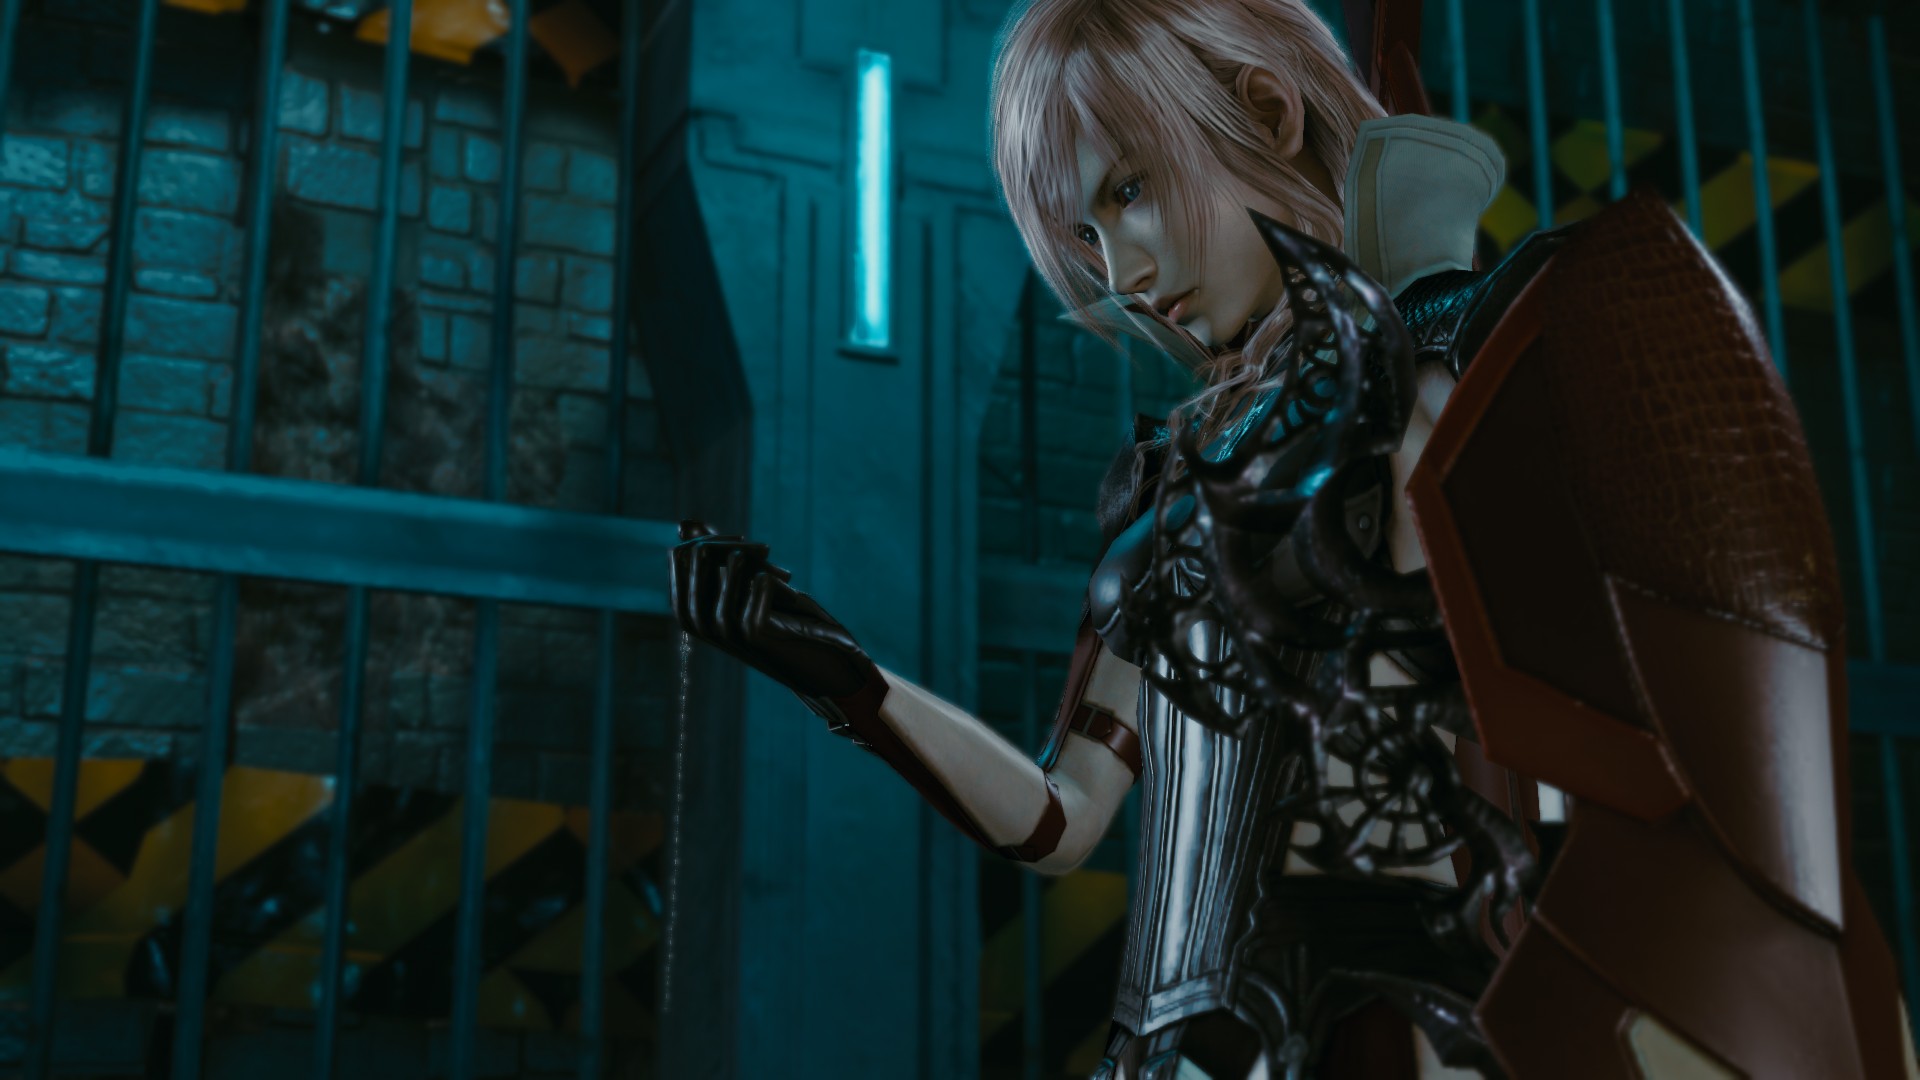 FFXIII: Lightning Returns will be limited to 1080p 60FPS on PC